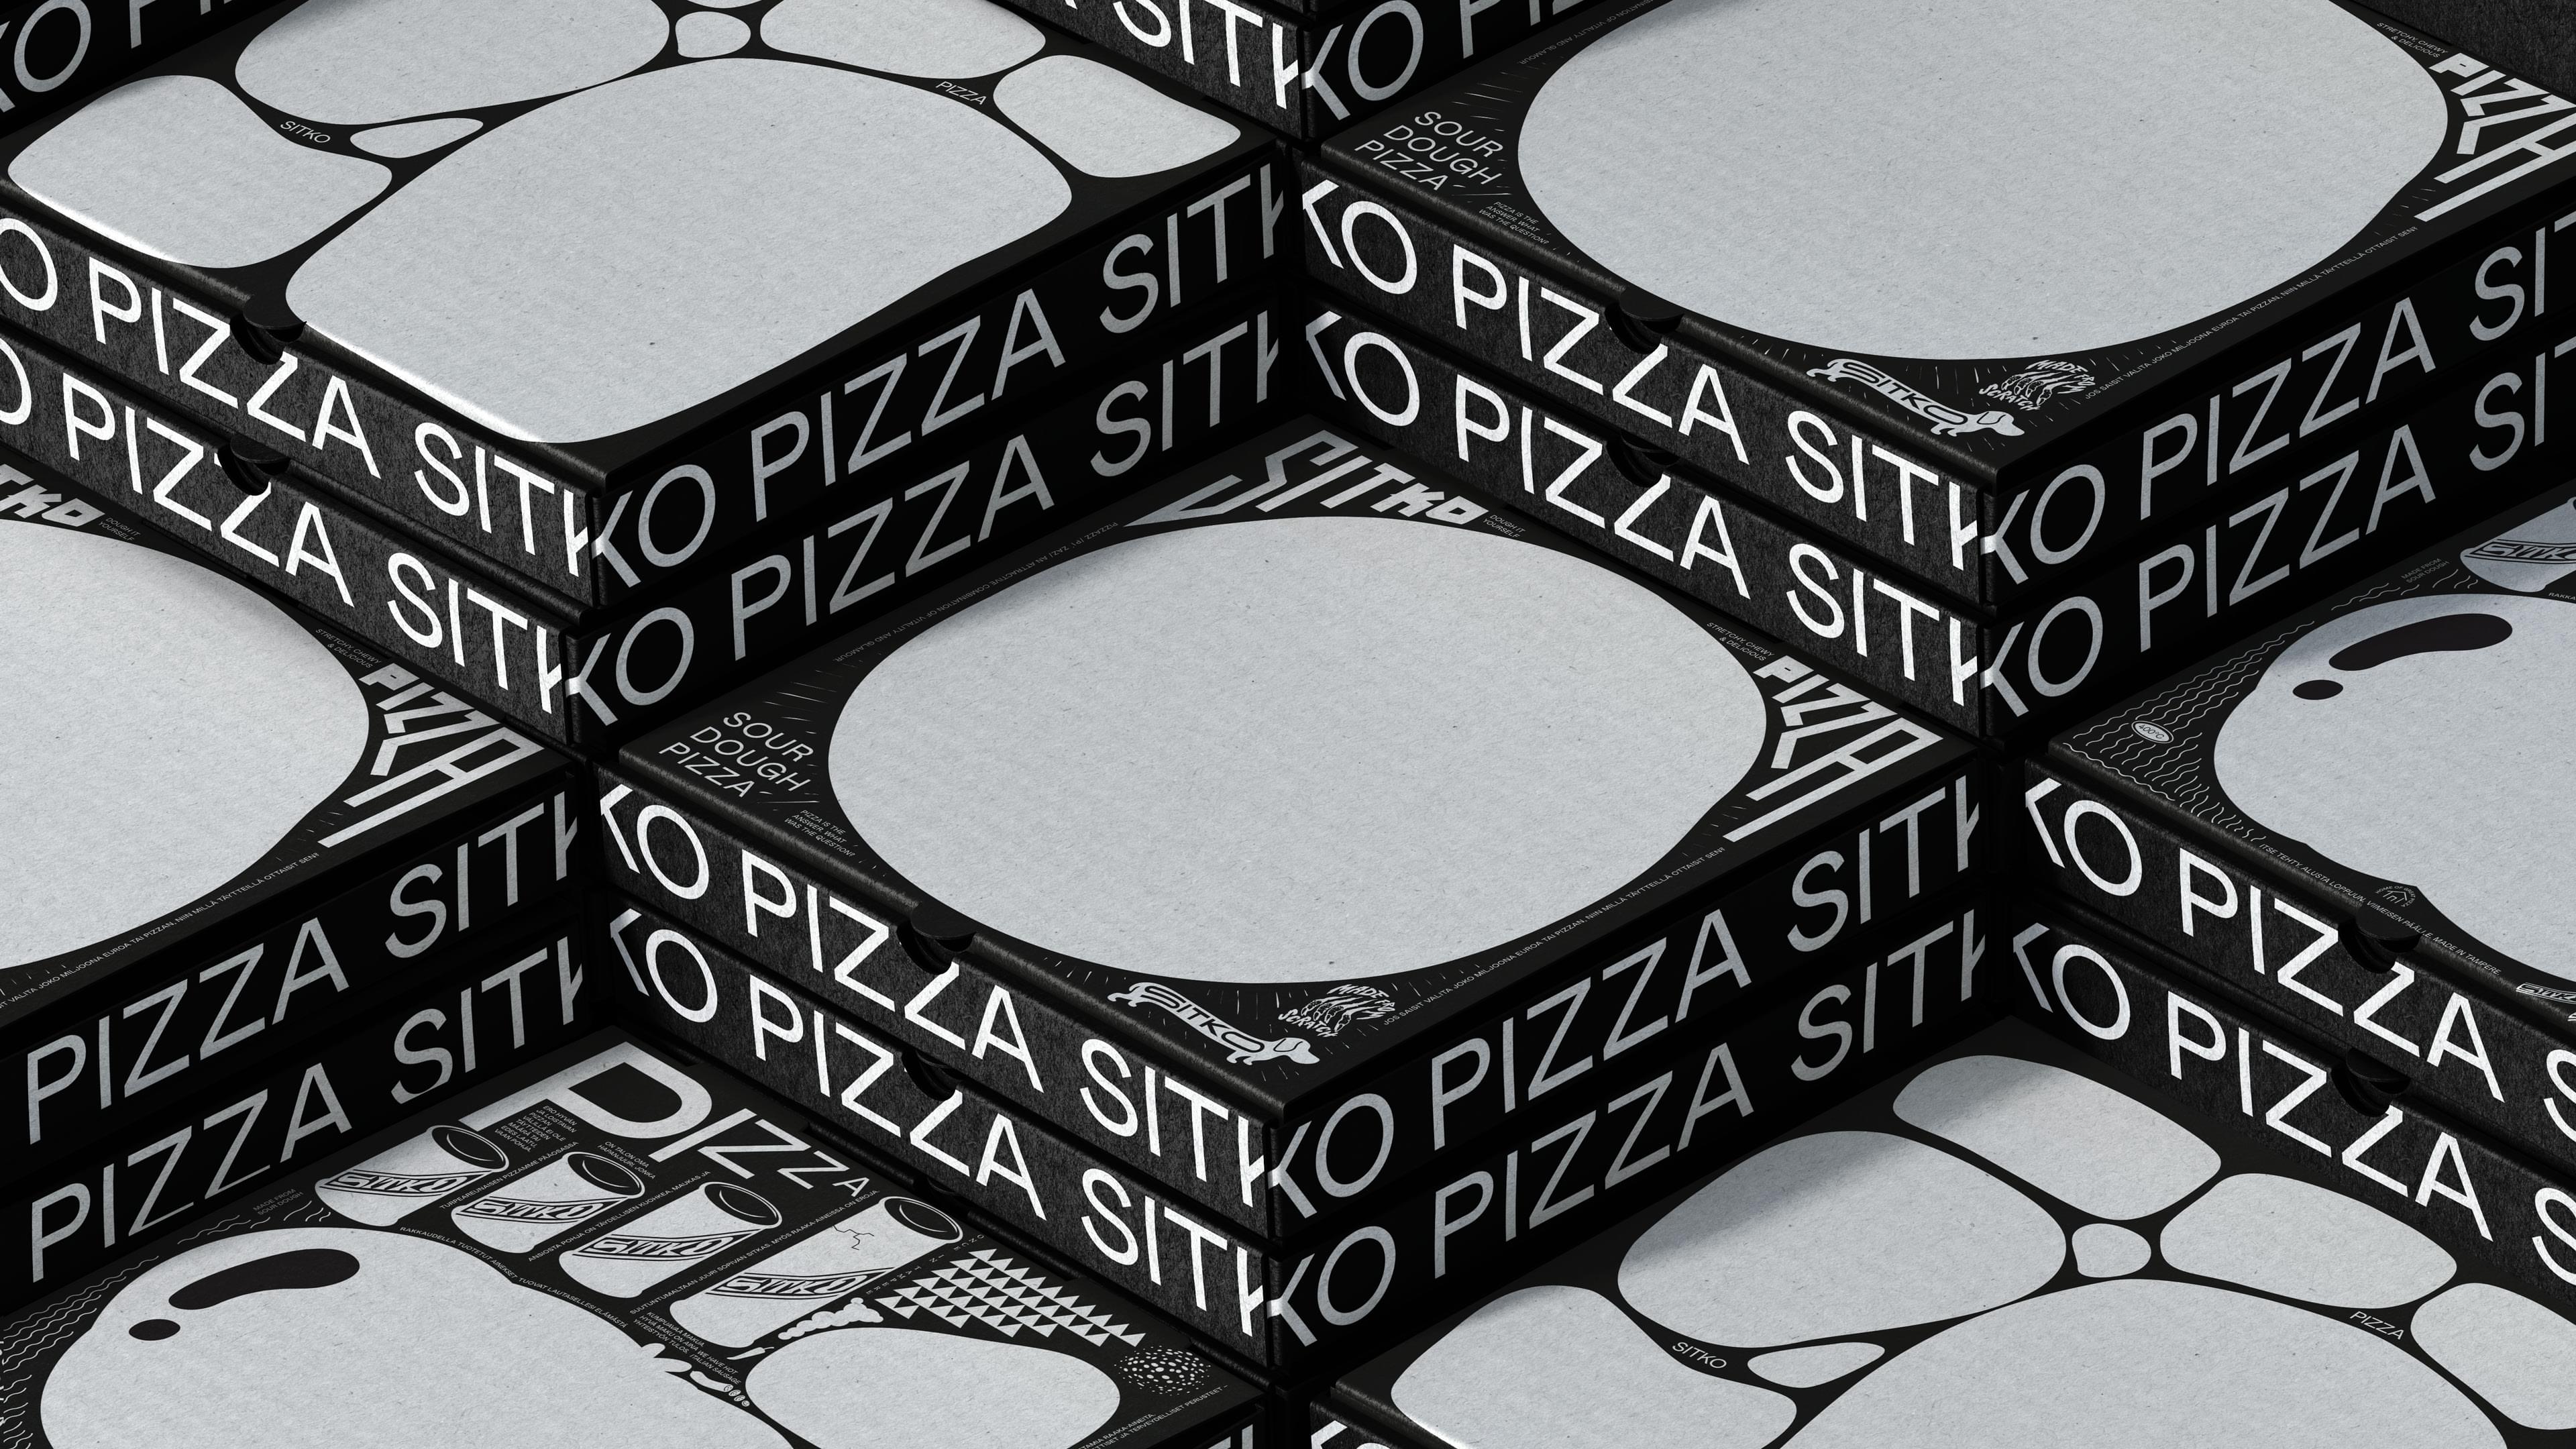 Visual identity and pizza box design by Werklig for Sitko Pizza Co.